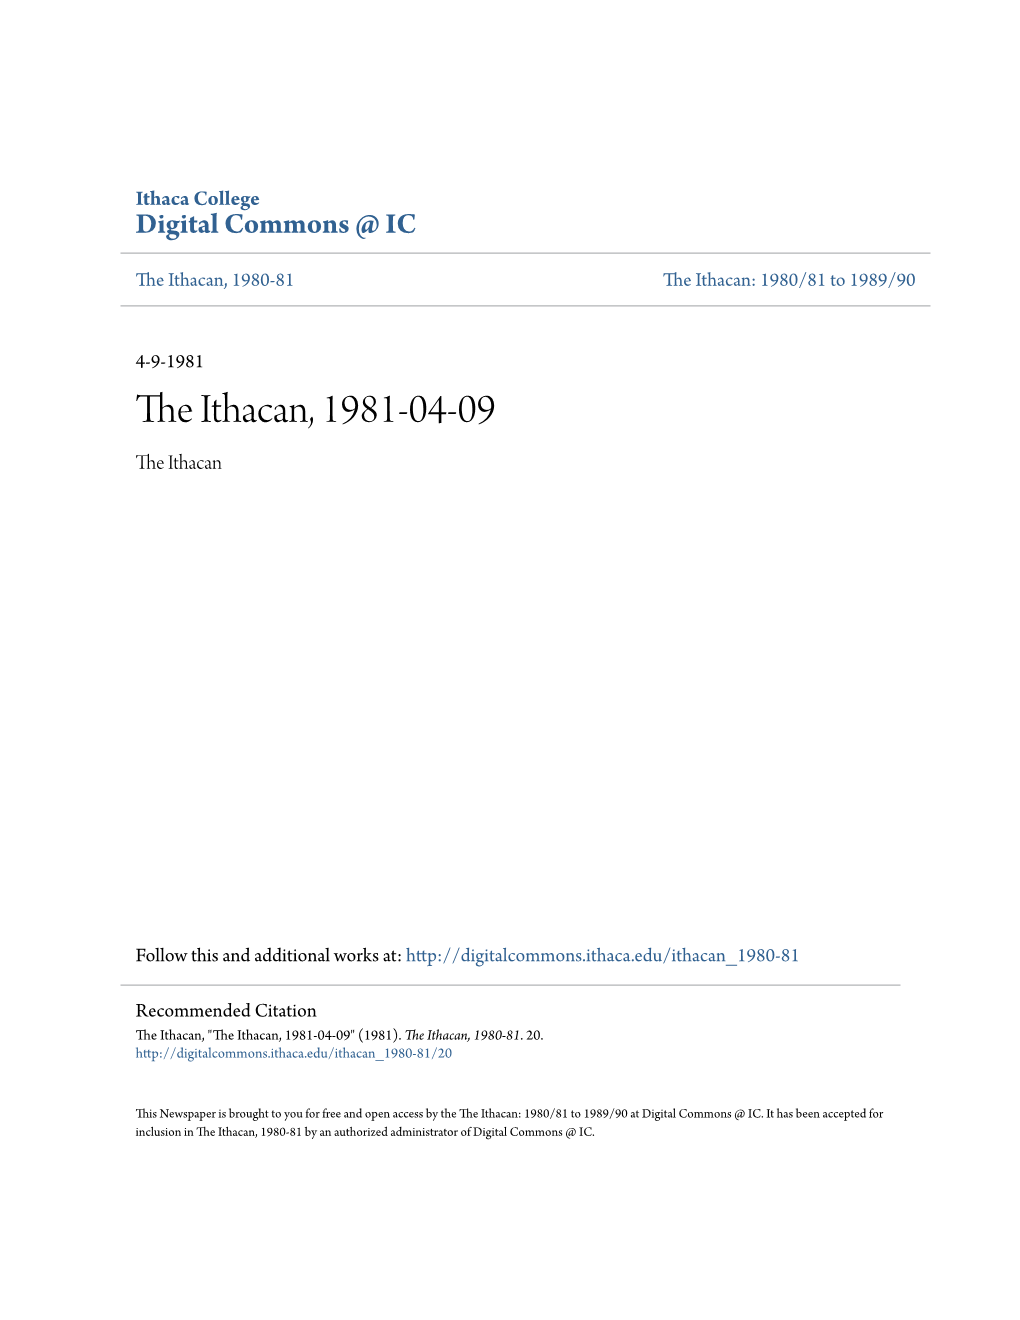 The Ithacan, 1981-04-09